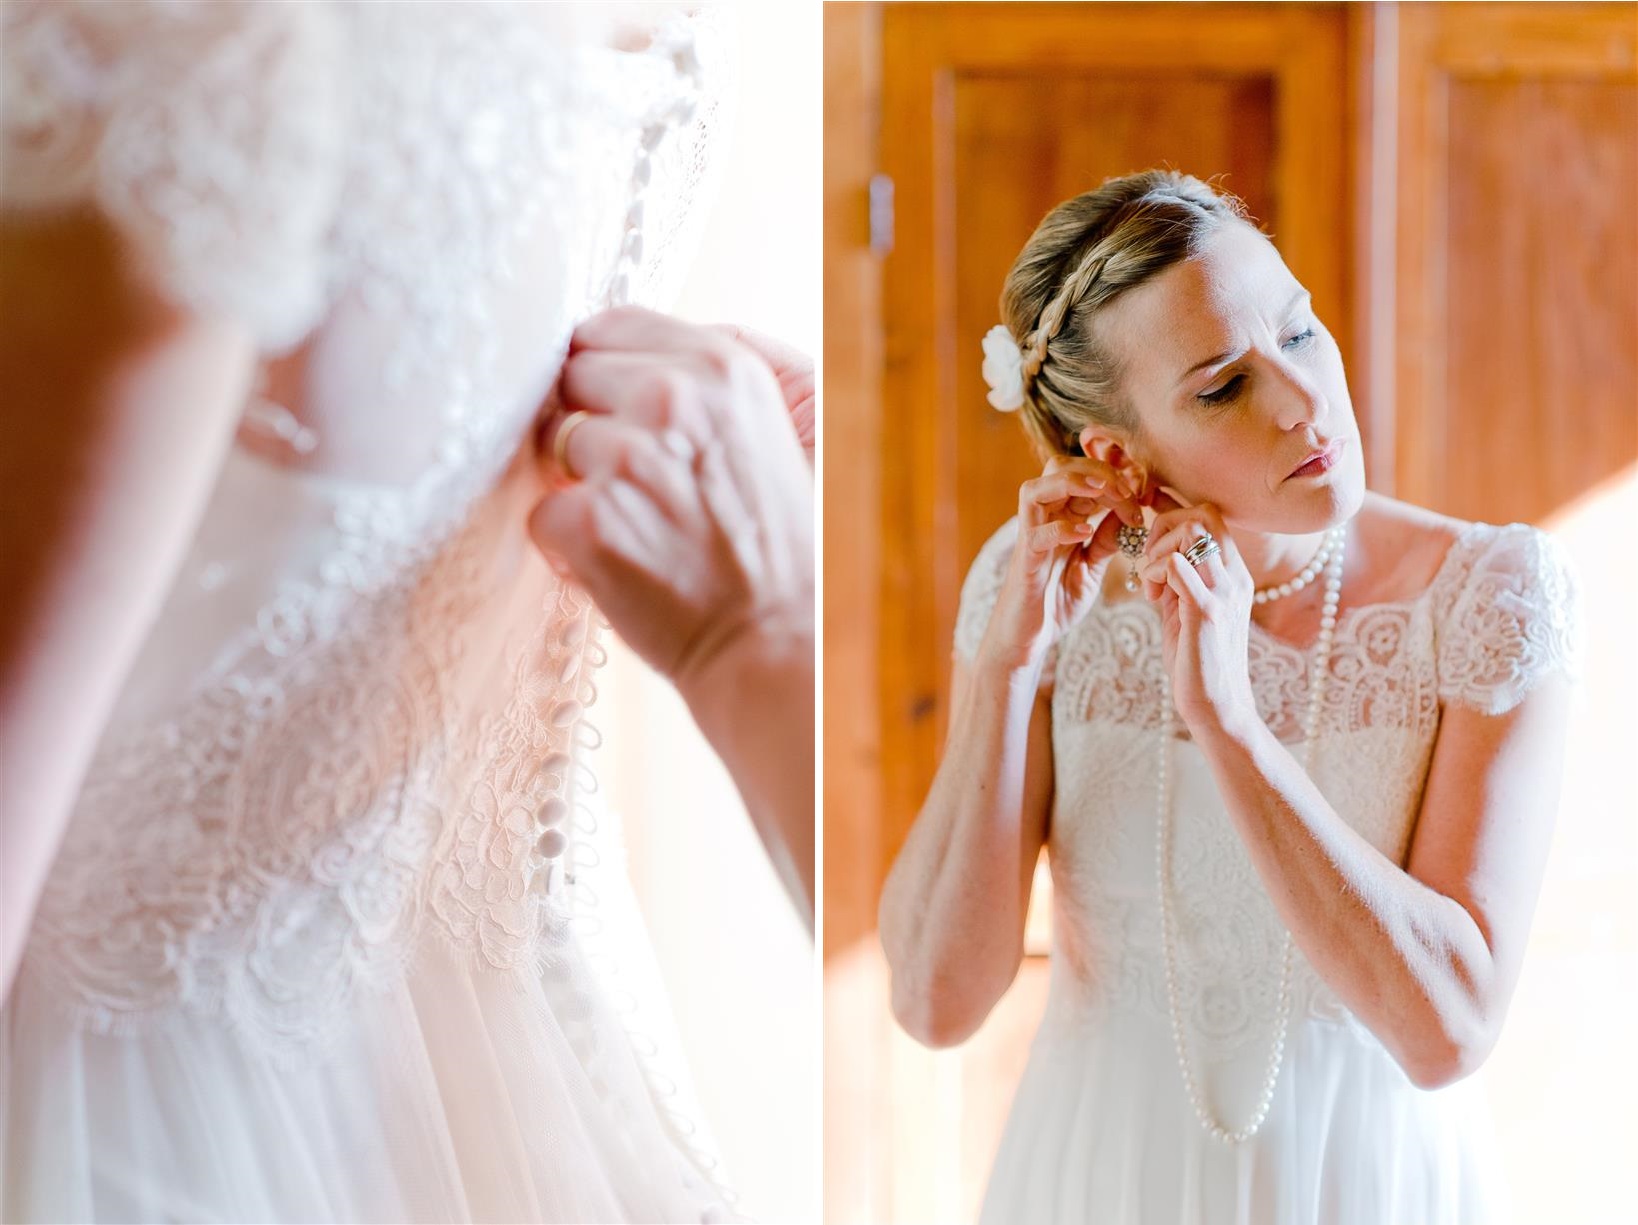 Bridal Accessories - A Vintage Inspired Destination Wedding in Tuscany from Nadia Meli Photography